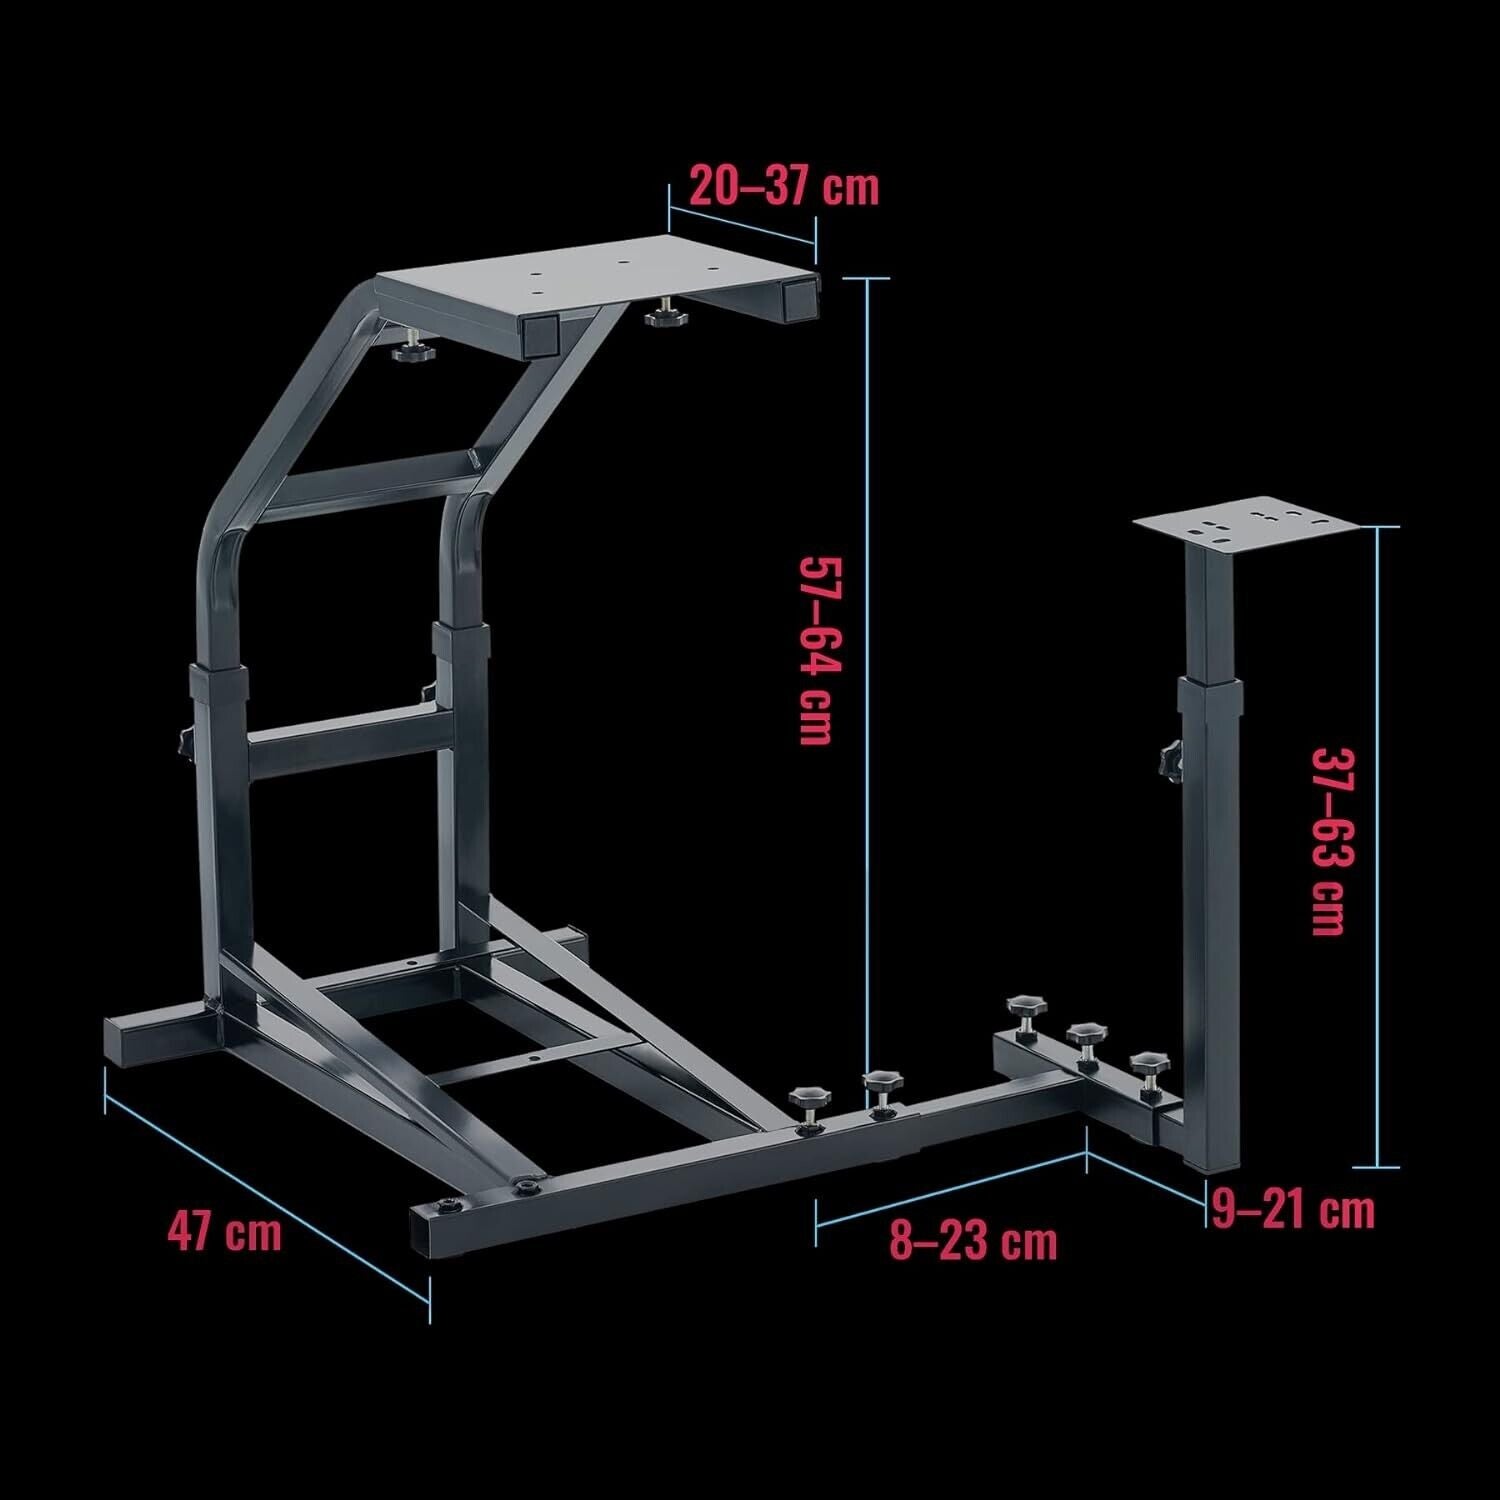 Driving Game Sim Racing Frame Stand Rig for Seat Wheel Pedals Xbox PS PC